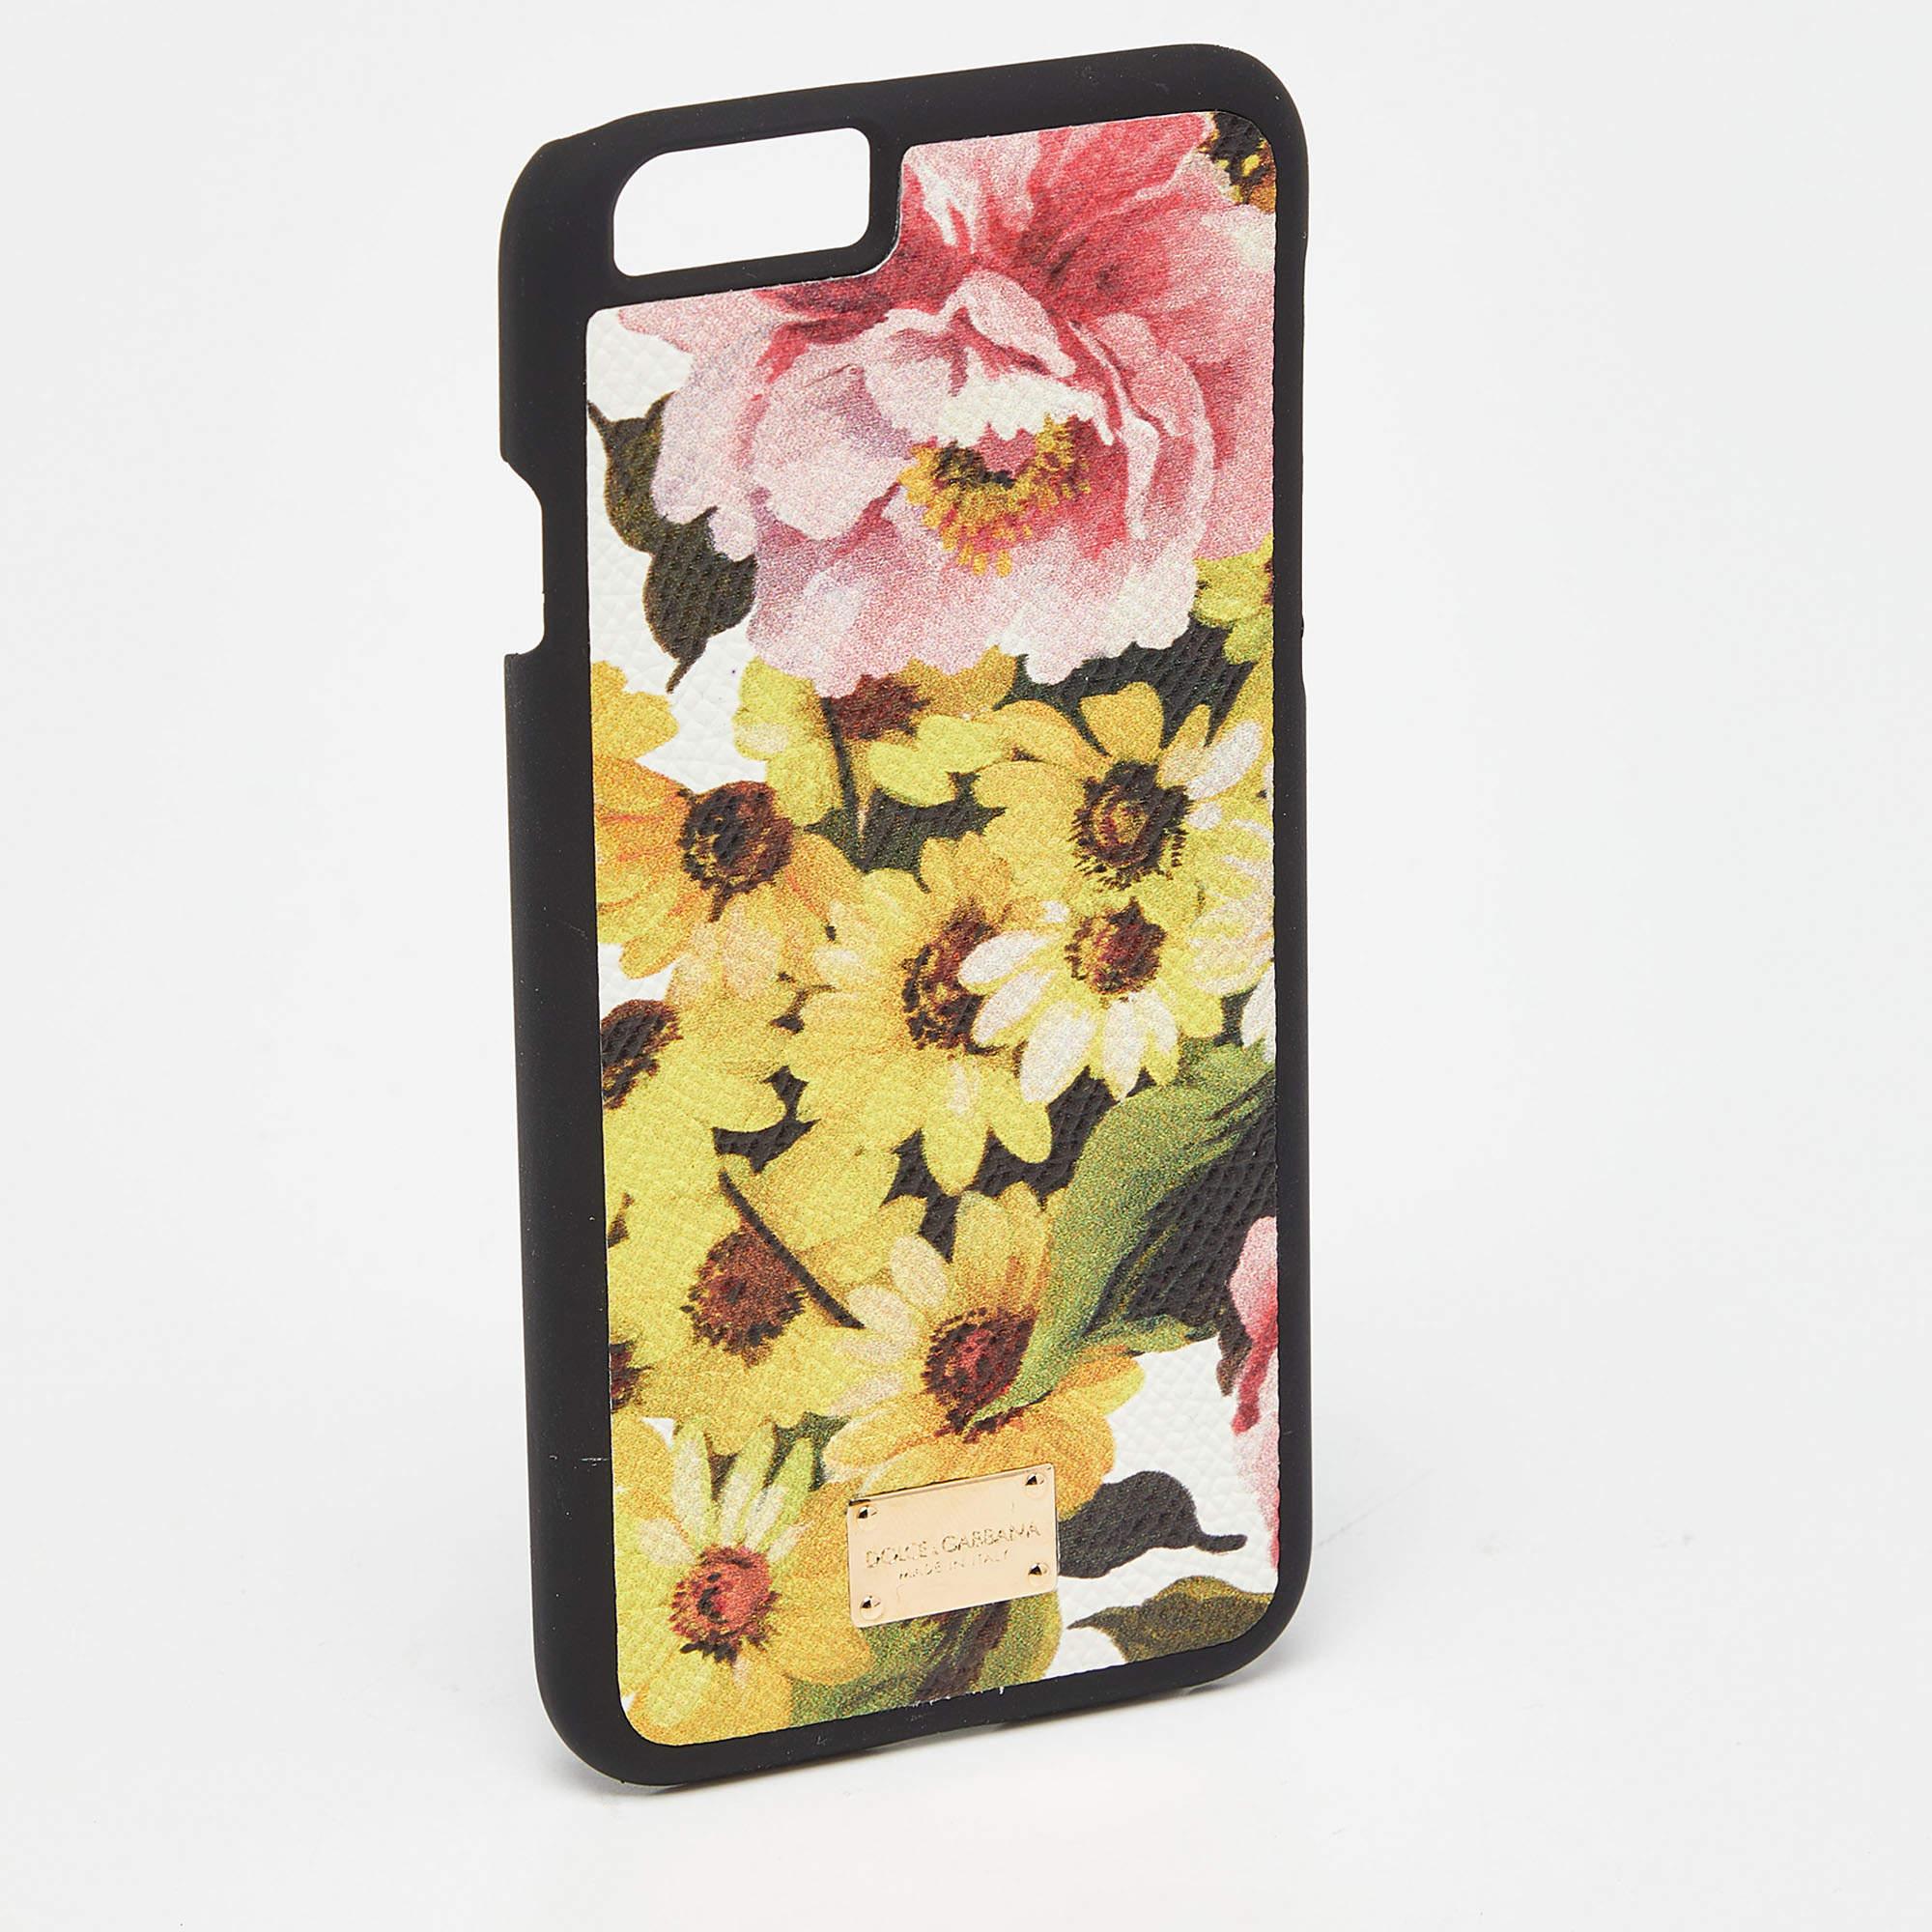 Dolce & Gabbana Multicolor Floral Print Leather iPhone 6 Case For Sale 2